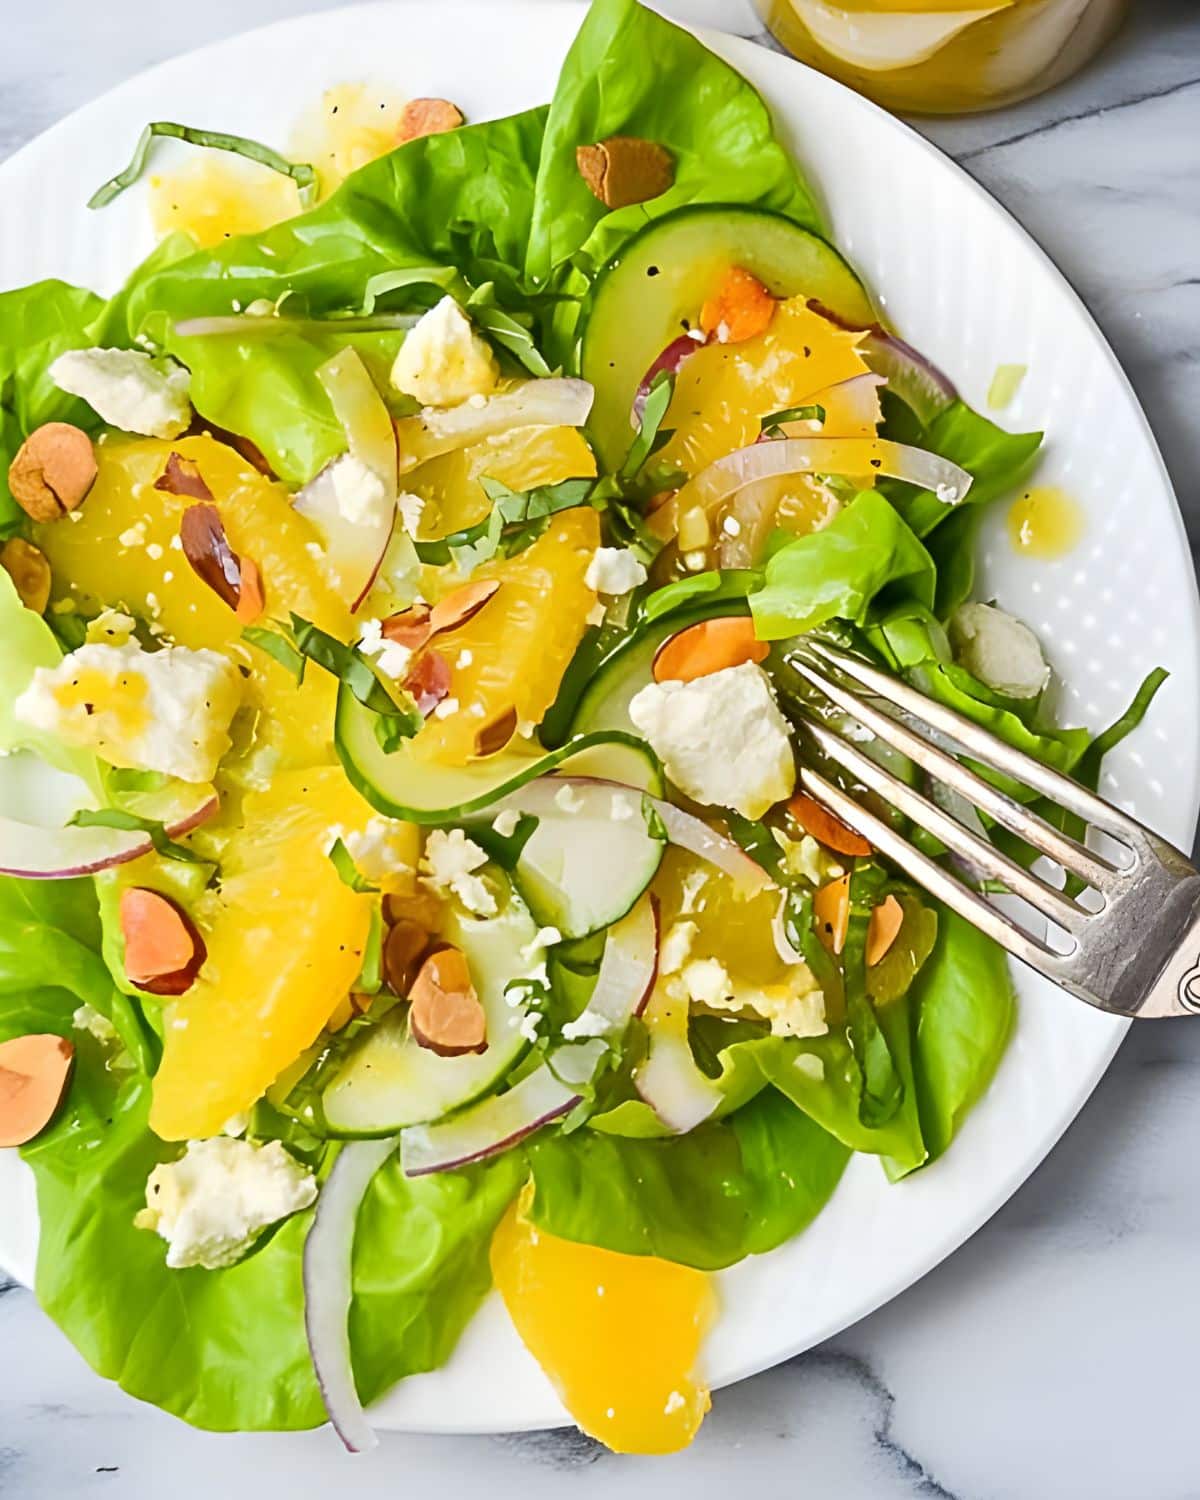 A green salad with orange segments and sliced almonds.